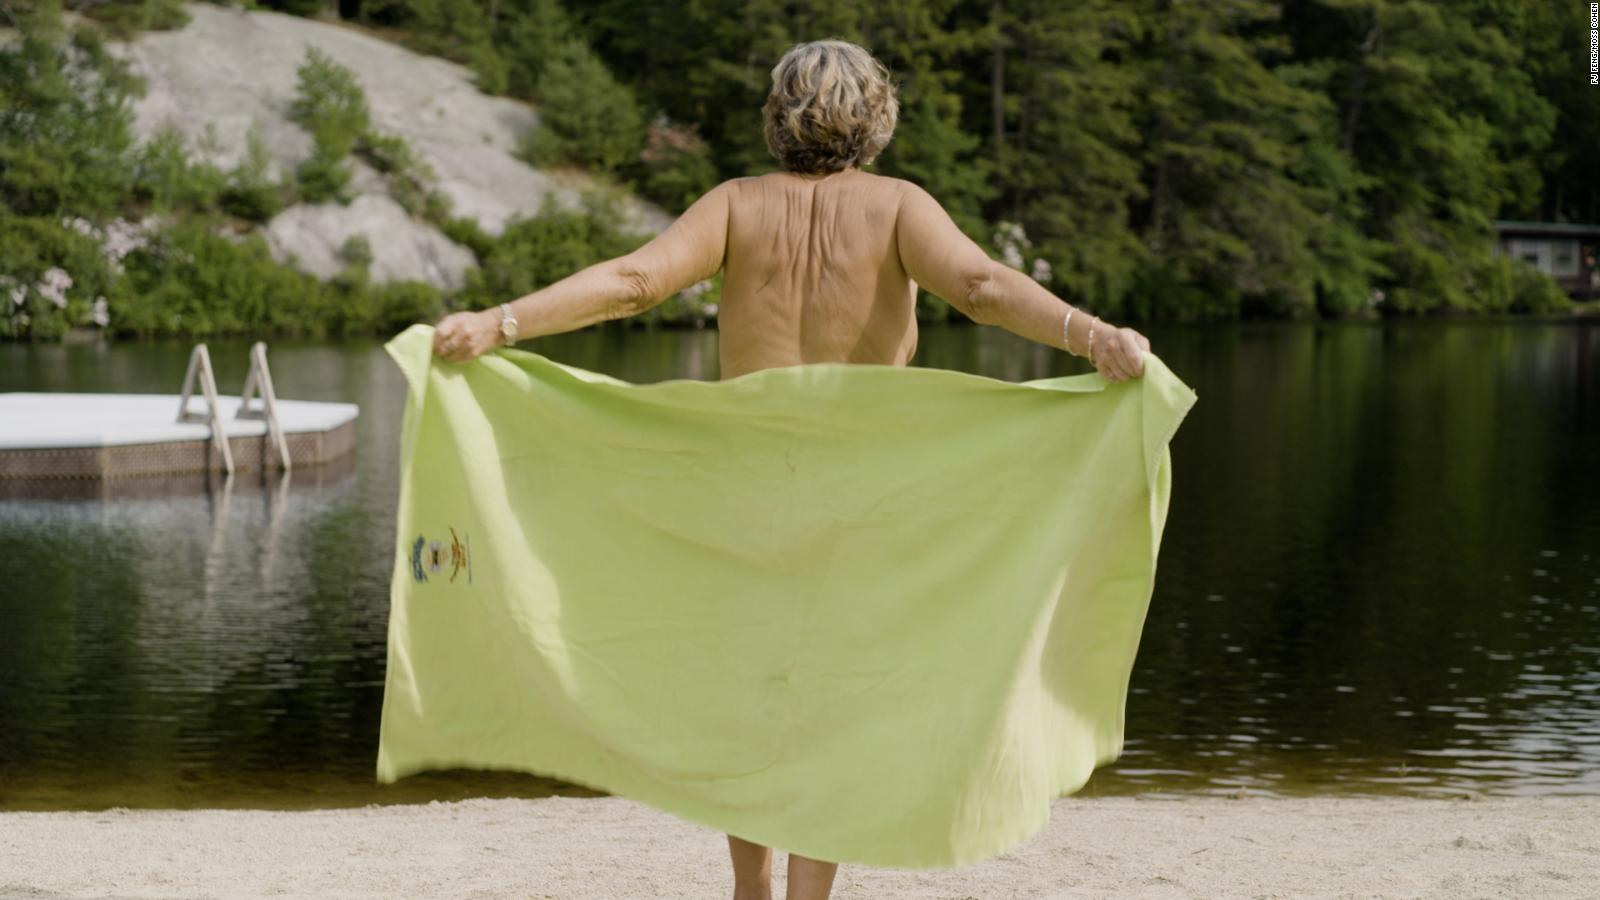 Nudist explains what you should definitely not do at a nude beach image